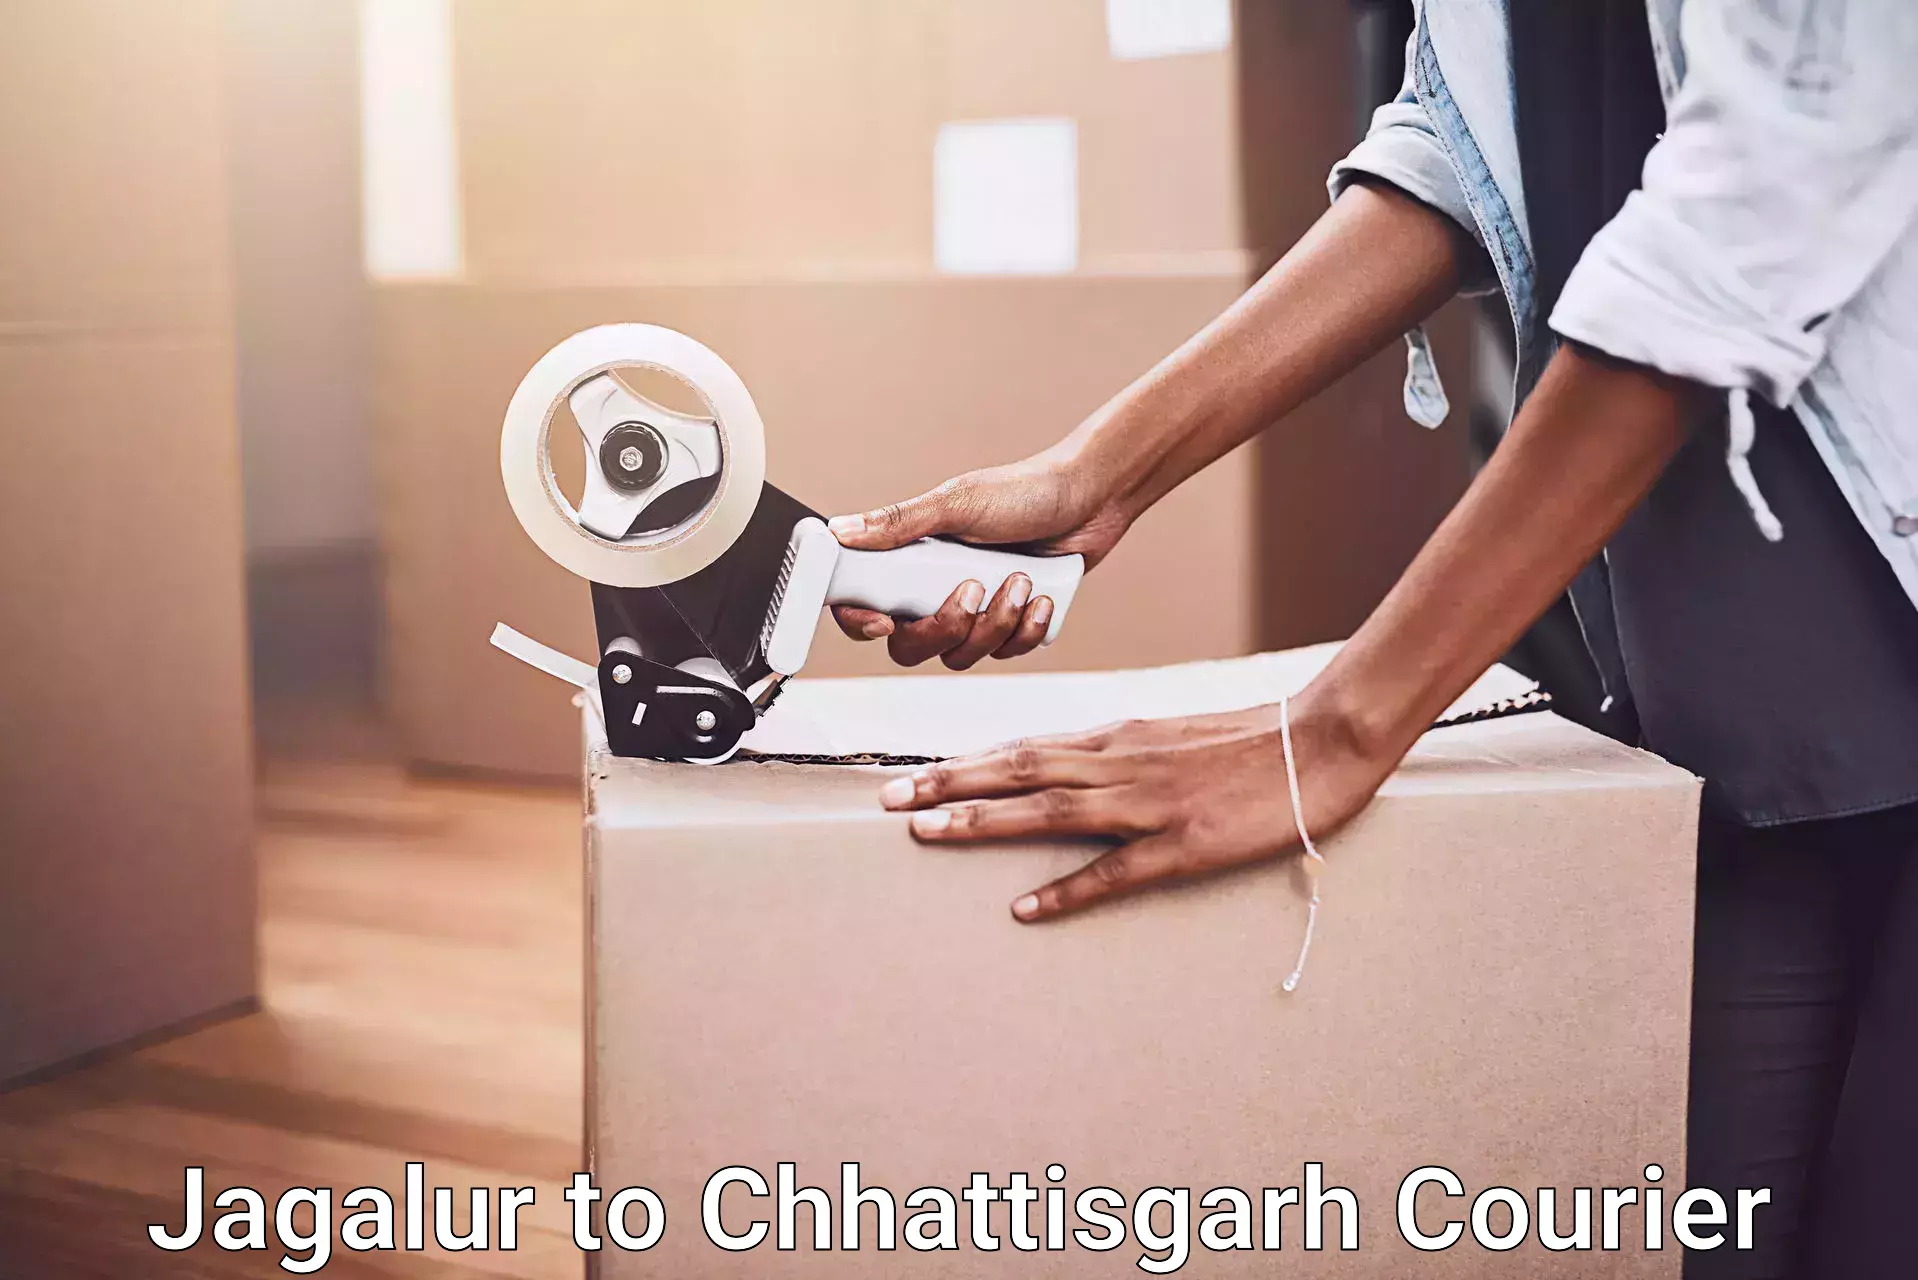 Quality moving and storage Jagalur to Chhattisgarh